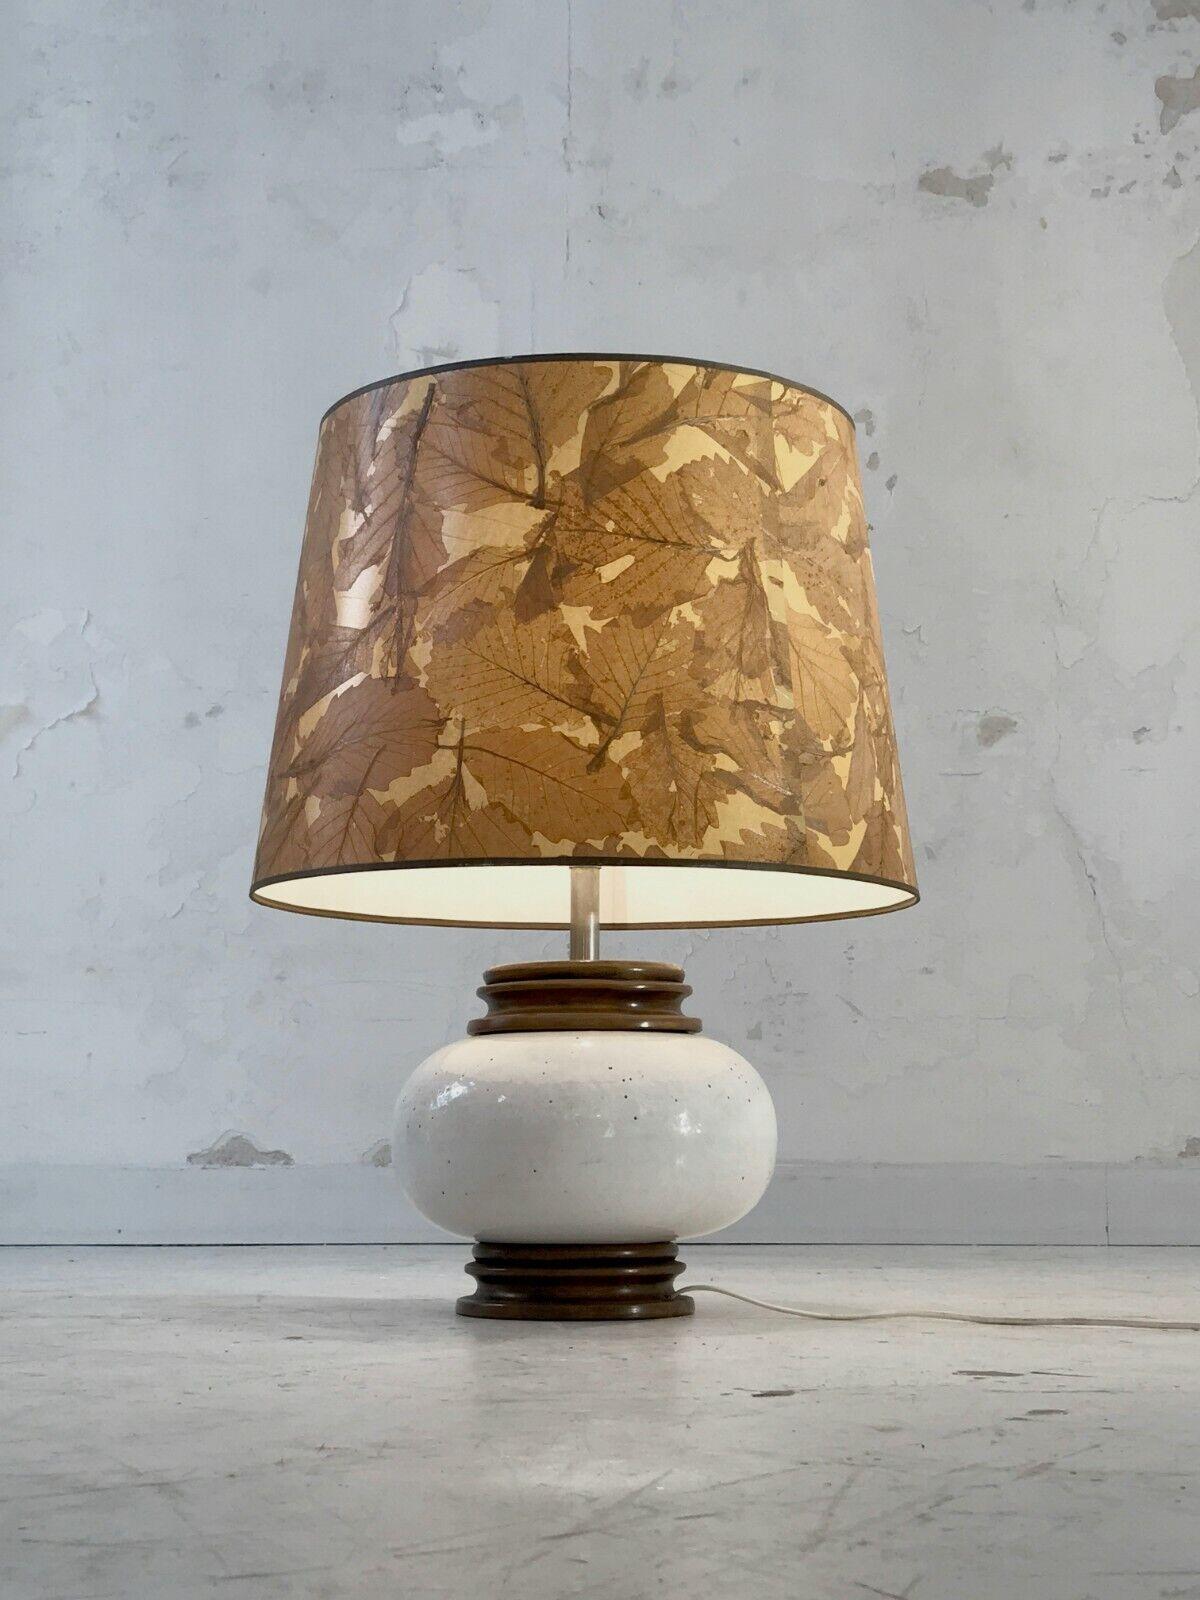 An imposing table or floor lamp, Post-Modernist, Popular Art, Shabby-Chic, in thick off-white and brown enameled ceramic, and its immense lampshade with compositions of dried leaves, to be attributed, Vallauris, France 1970.

SOLD WITH ITS